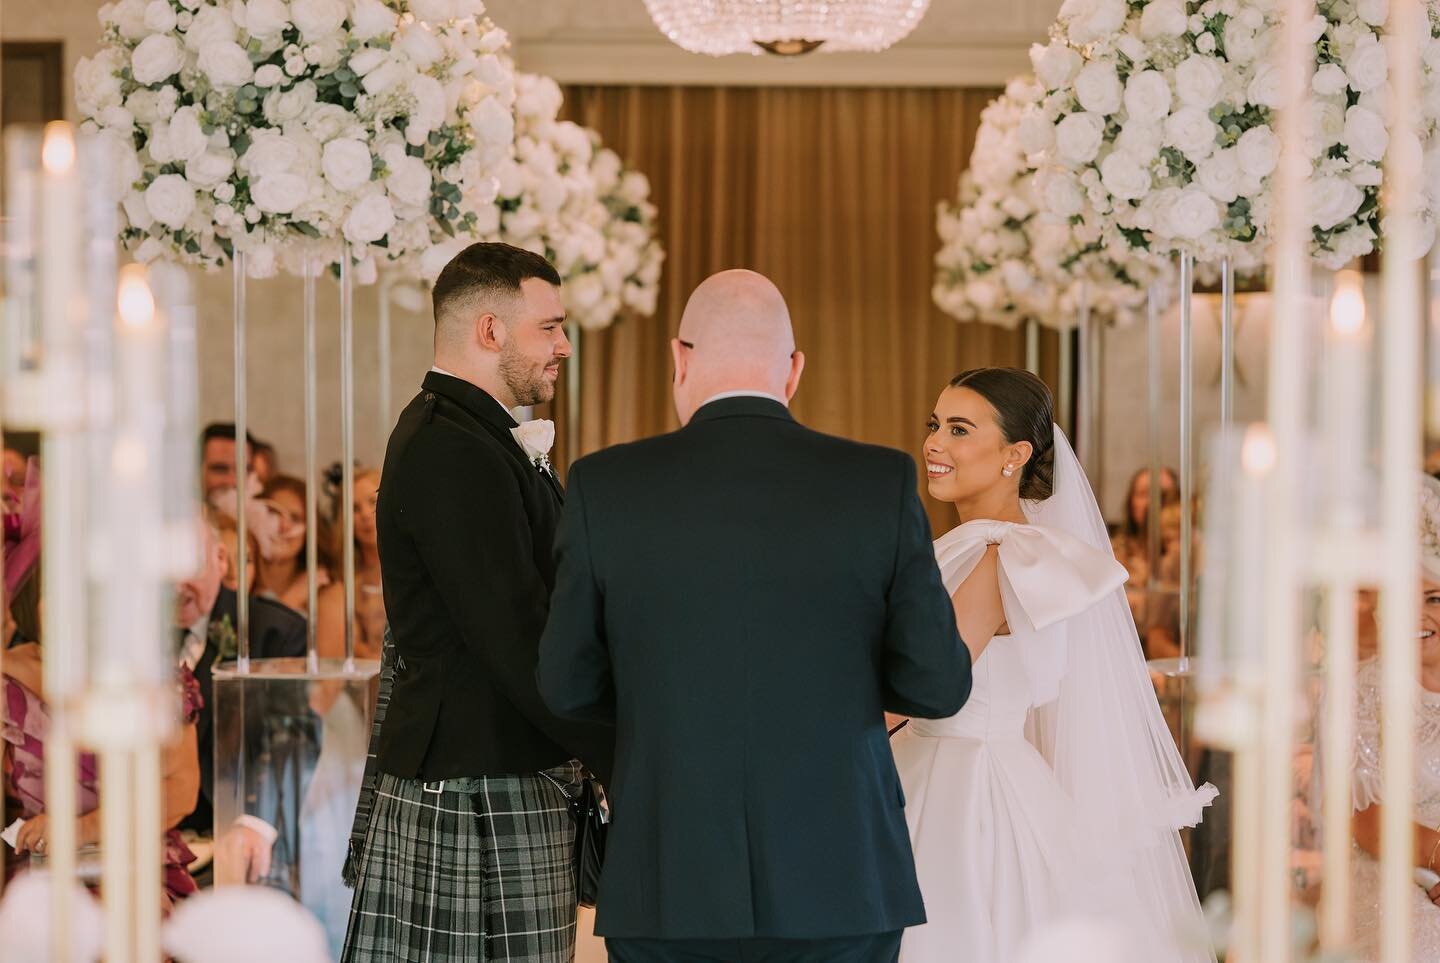 A huge congratulations to Eilidh &amp; Euan who got married at @boclairhousehotel on Saturday! What a day! They were married by my good pal @raymondlawriecelebrant and it was great to work with @rizzo.films &amp; @whitneygrahamphotography again! Than